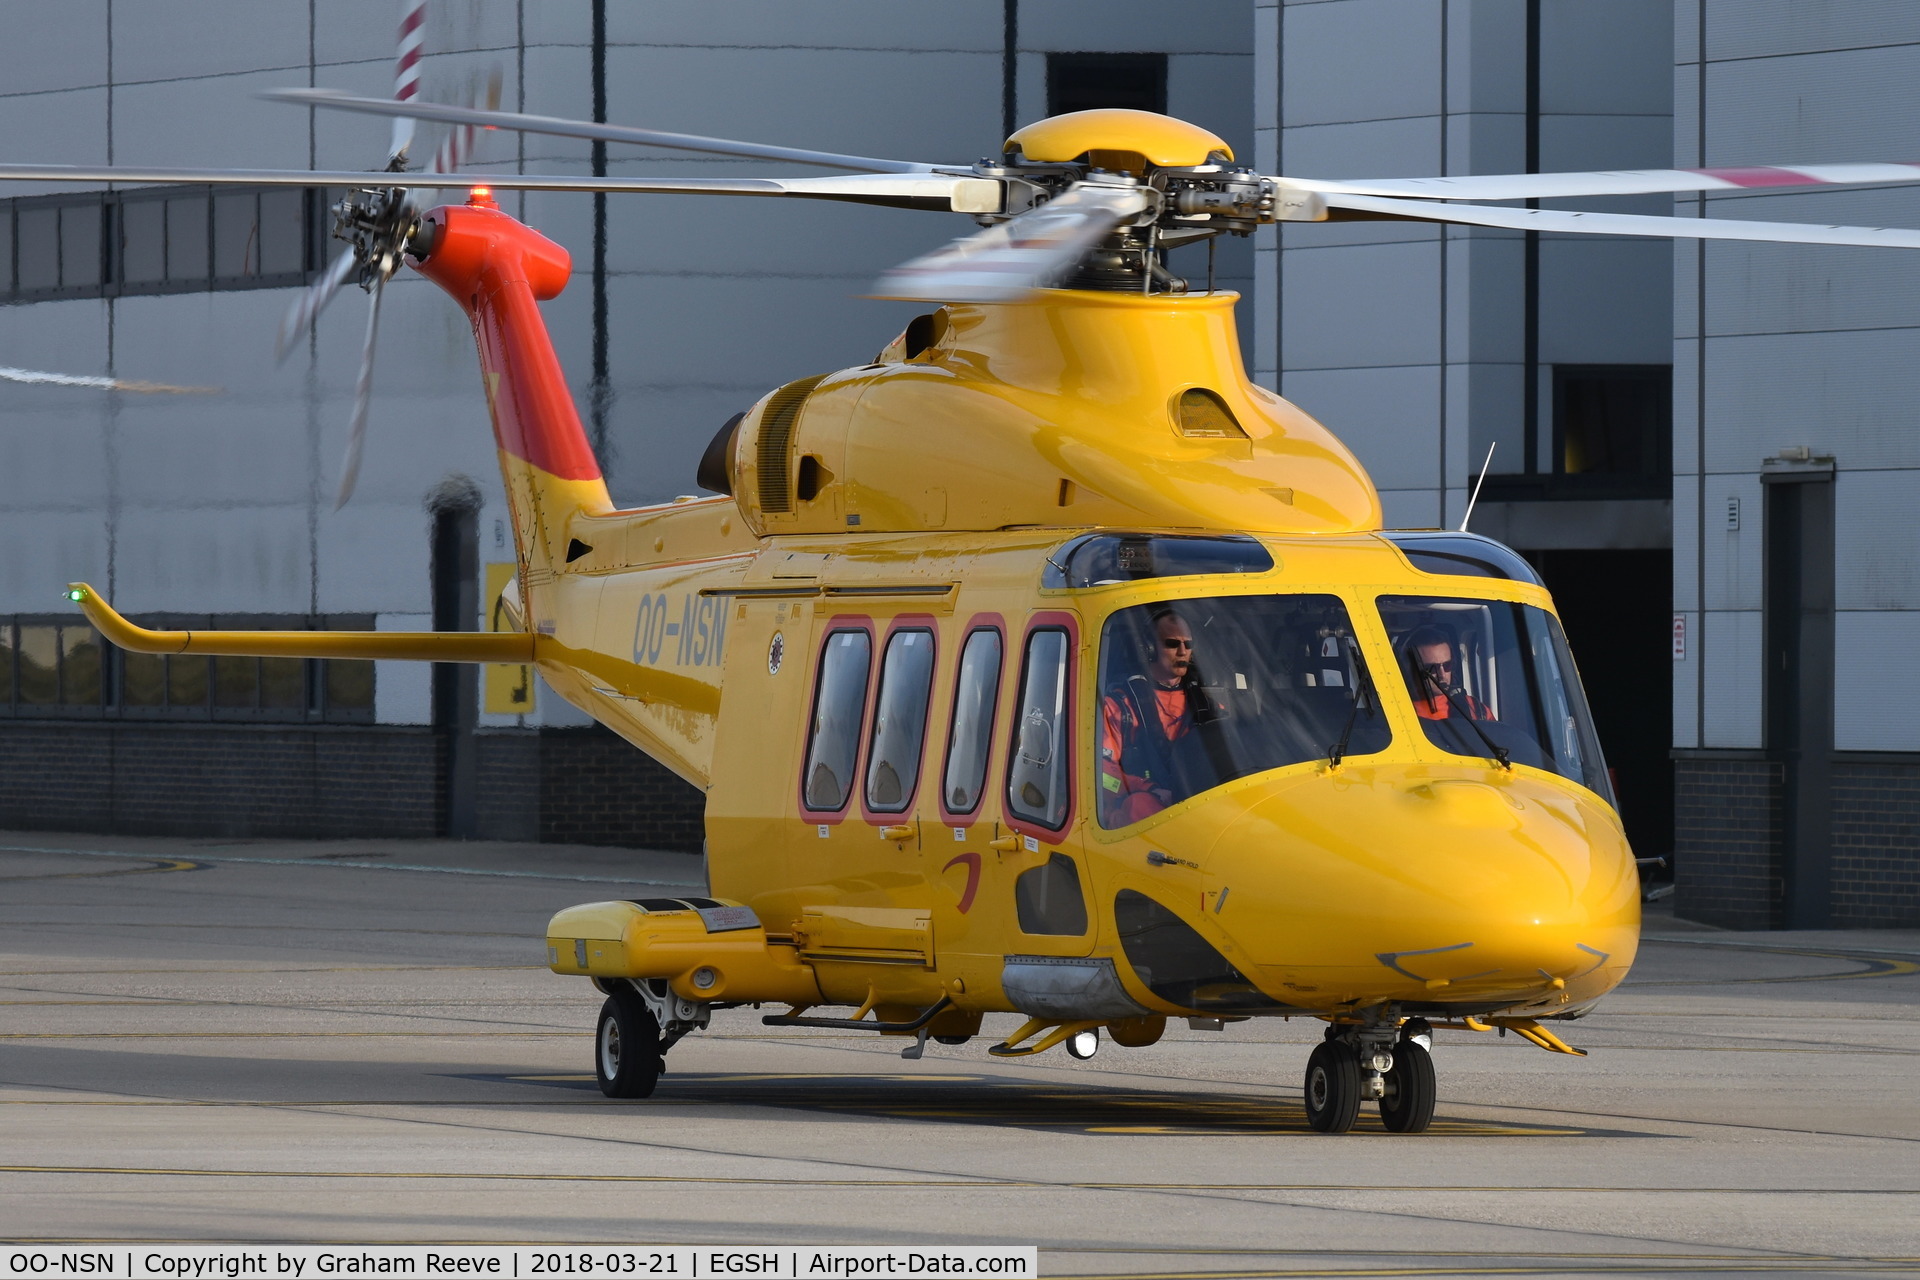 OO-NSN, 2015 AgustaWestland AW-139 C/N 31700, About to depart from Norwich.